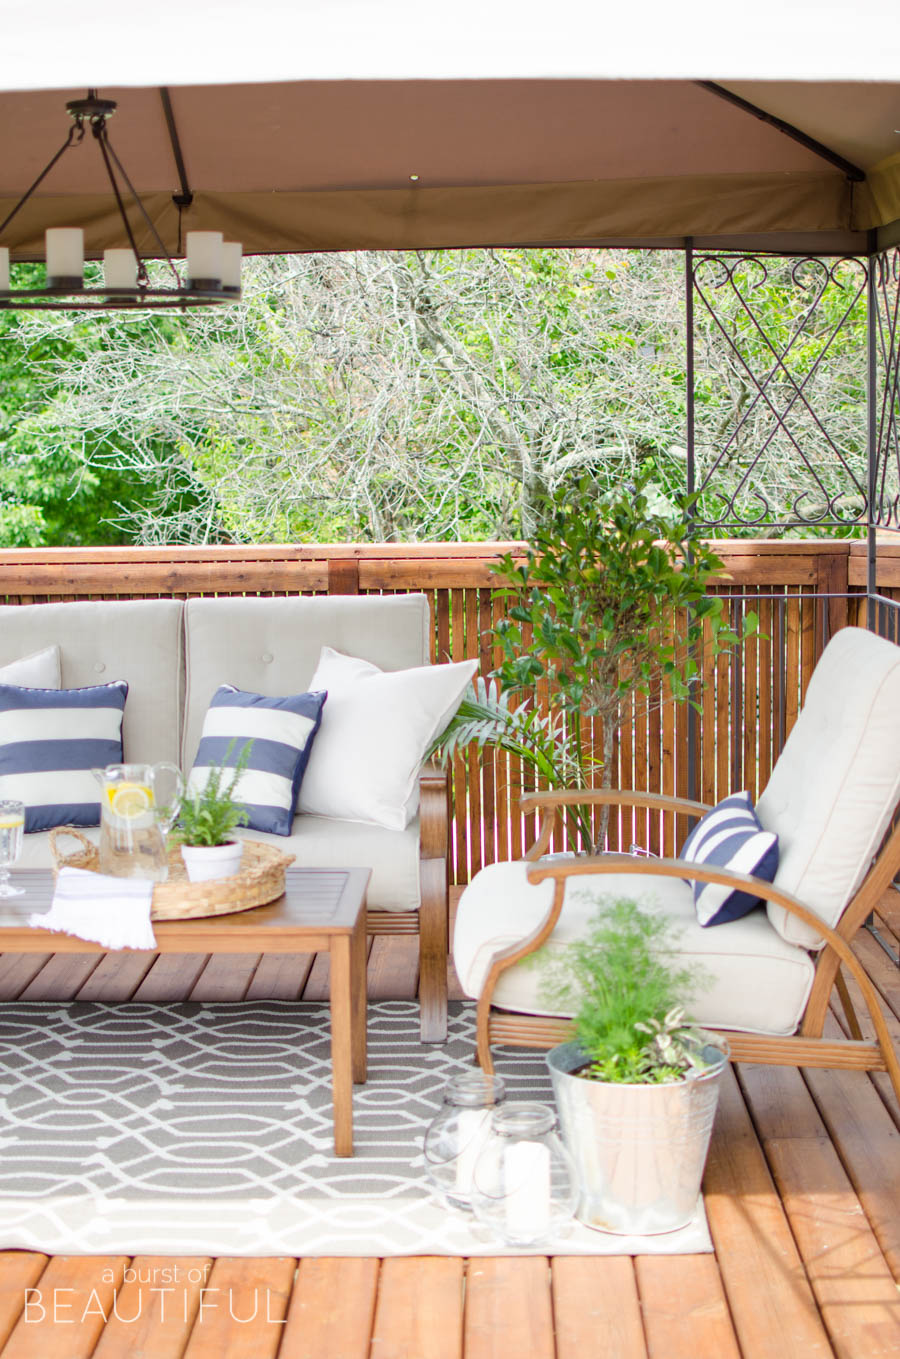 Learn how to revive a wood deck and create a beautiful outdoor living space with these easy to follow instructions from A Burst of Beautiful 